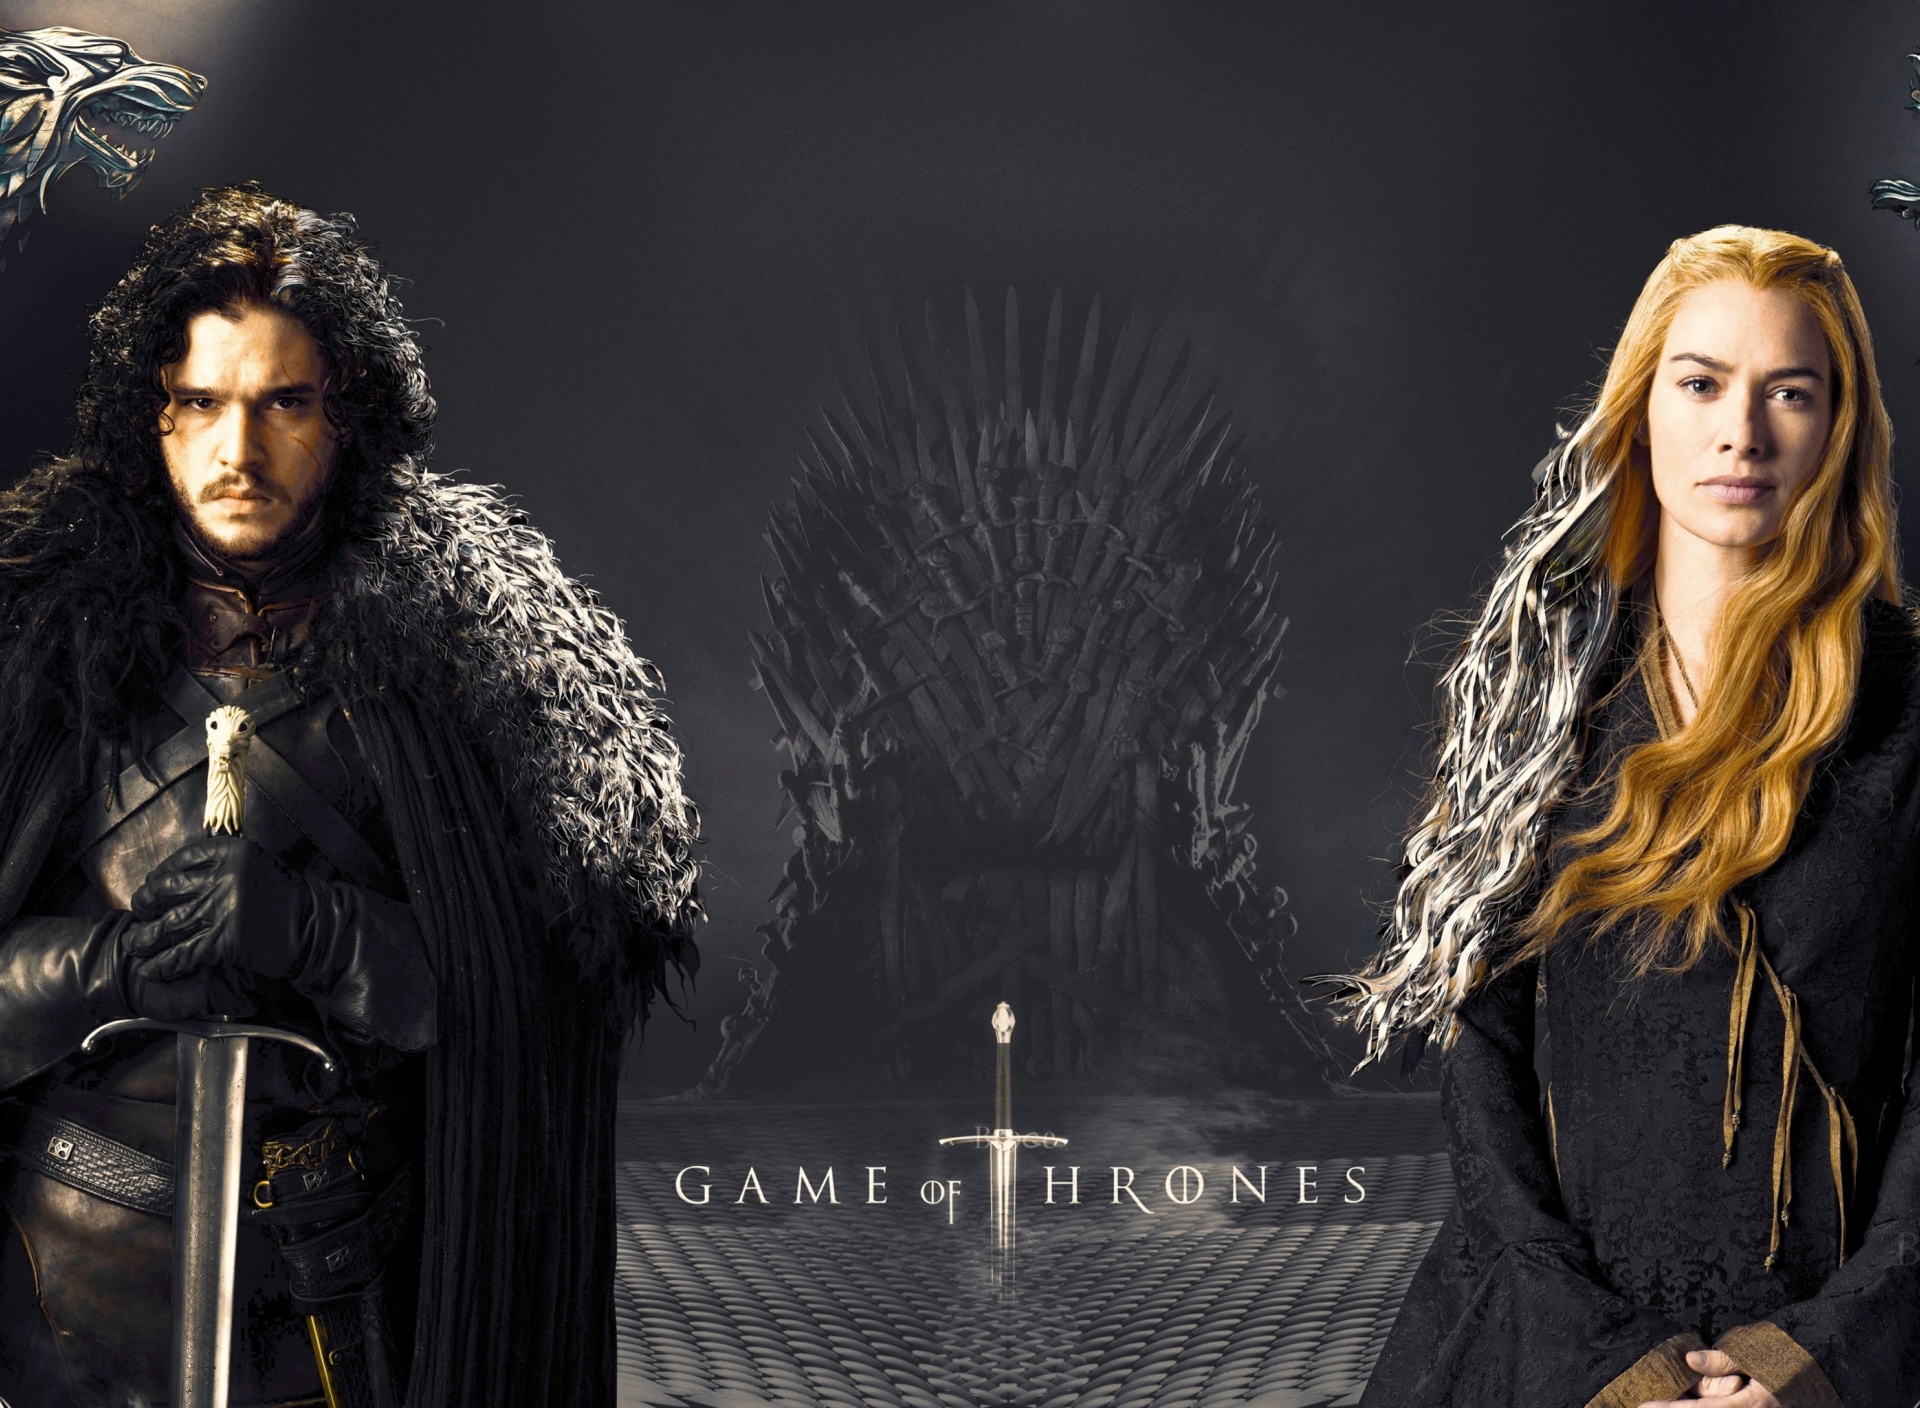 Game Of Thrones actors Jon Snow and Cersei Lannister screenshot #1 1920x1408